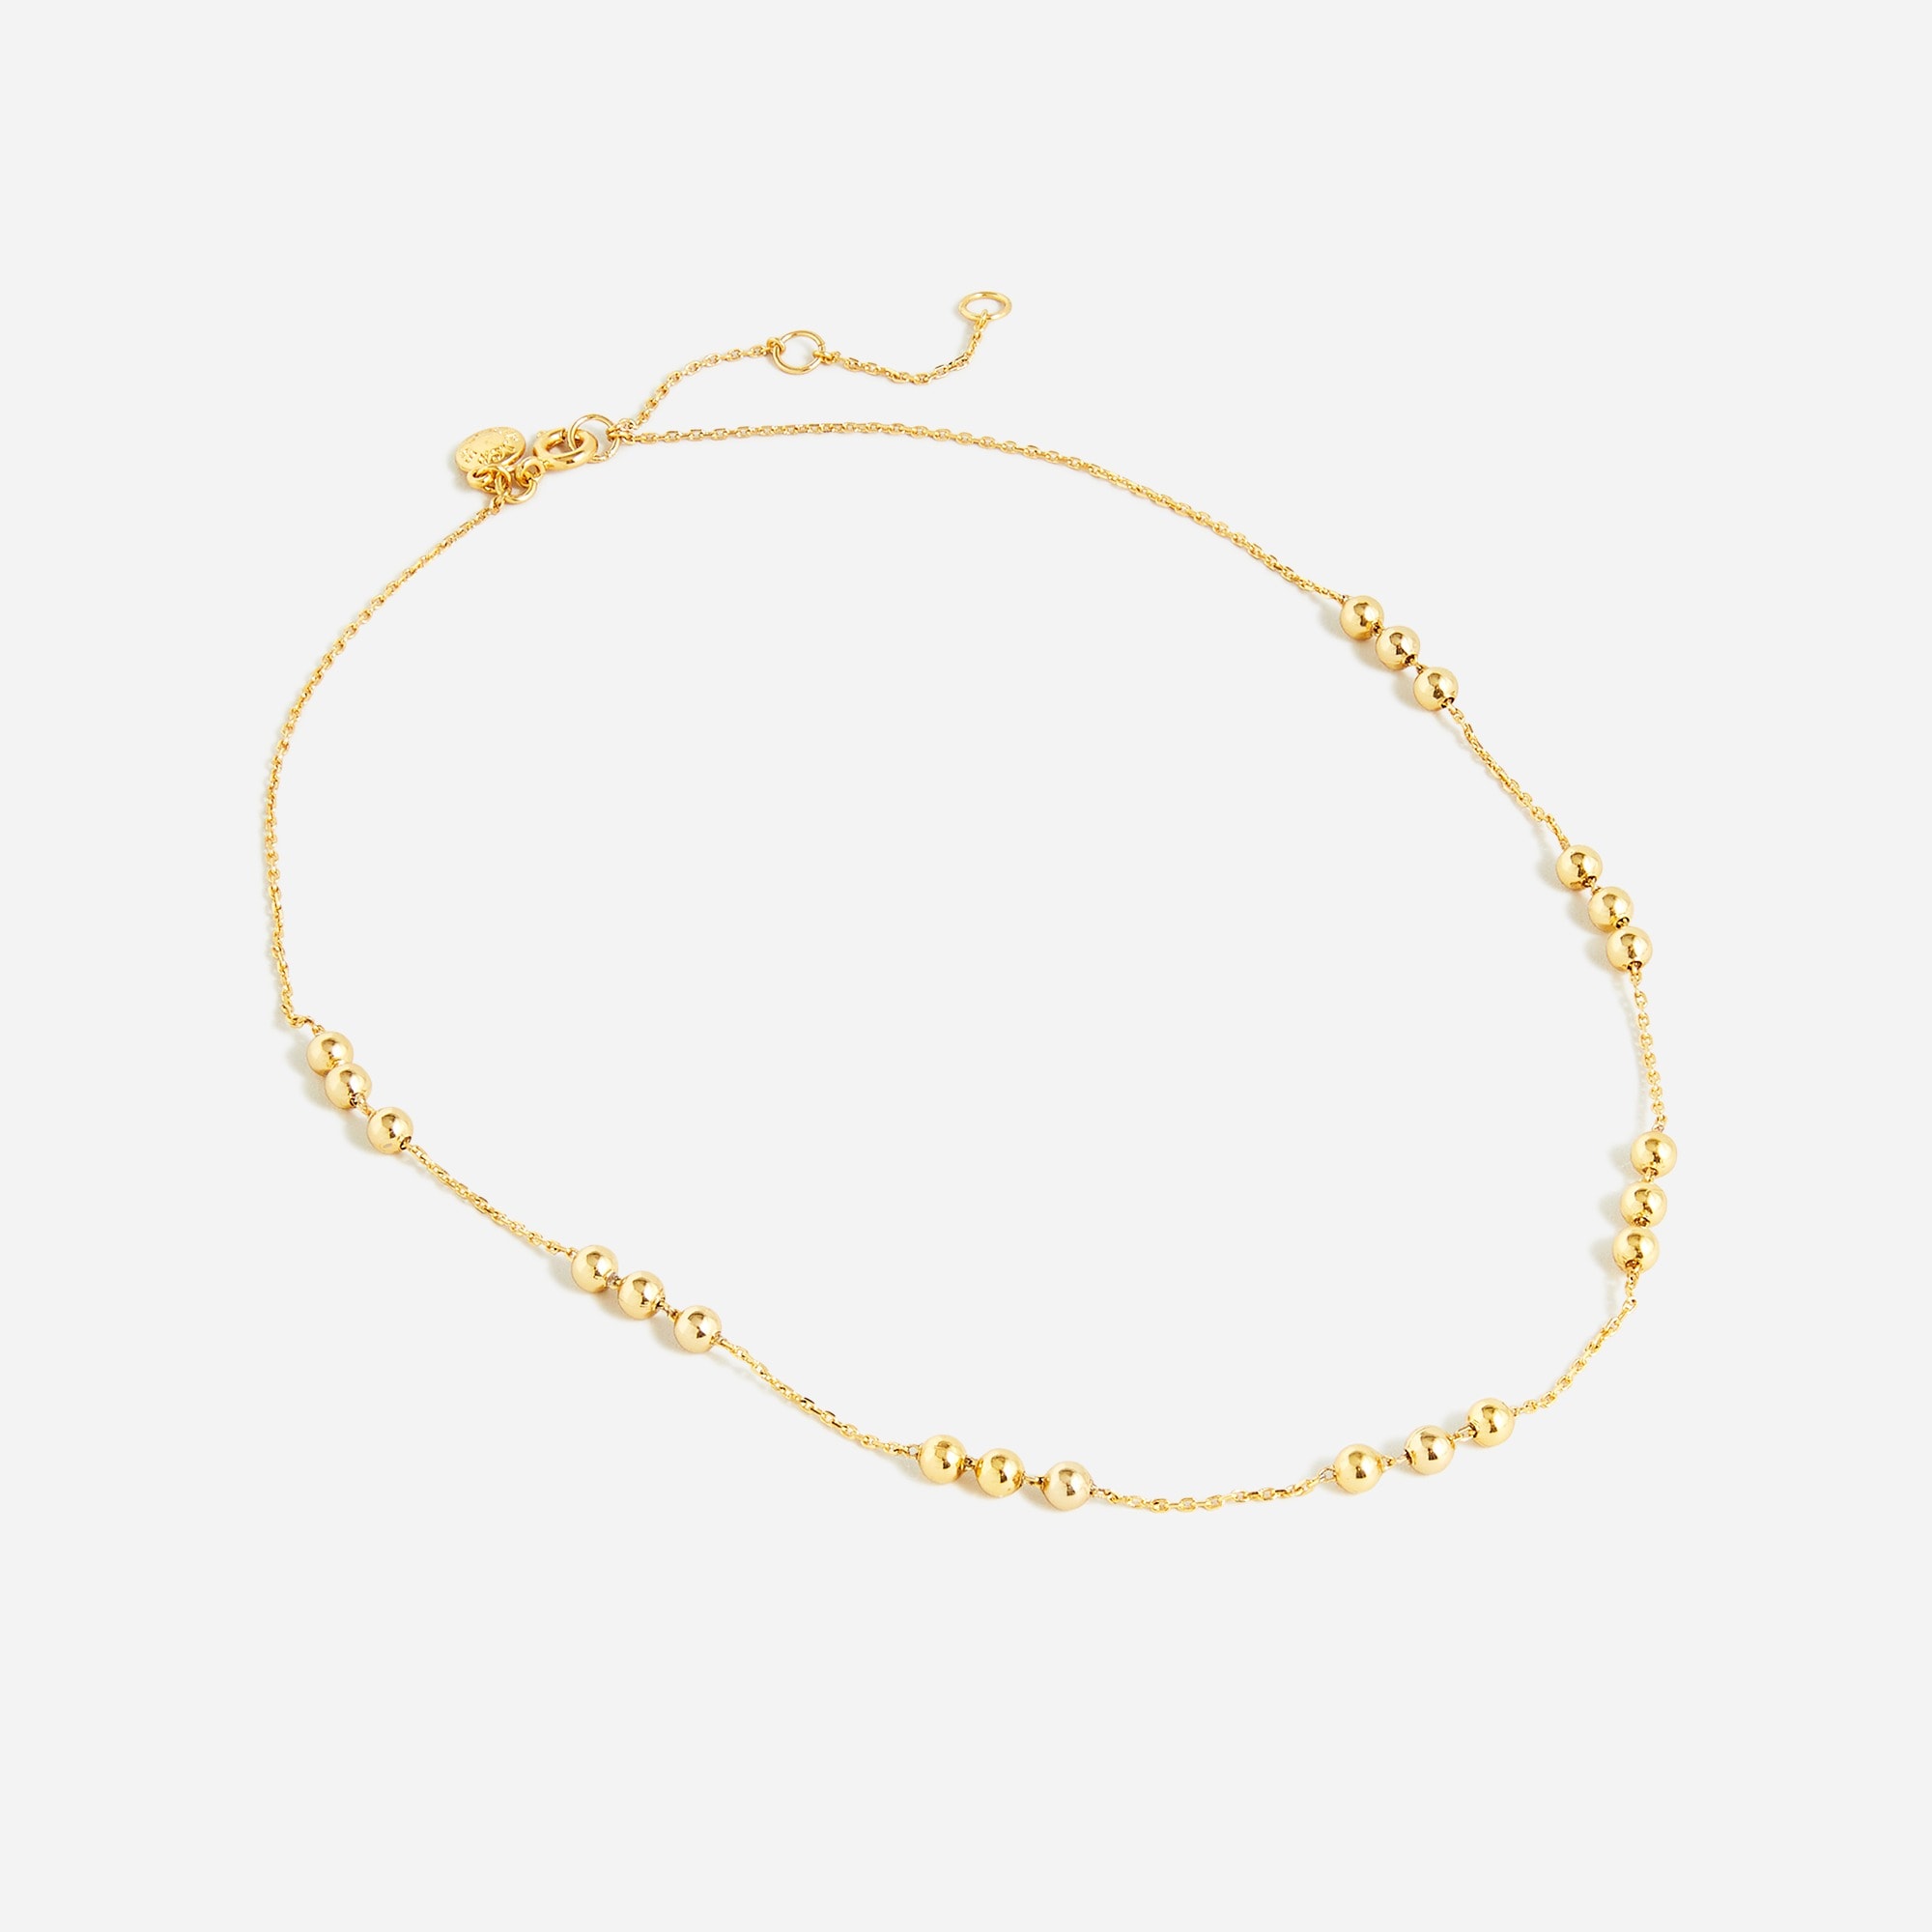  Gold-ball chain necklace